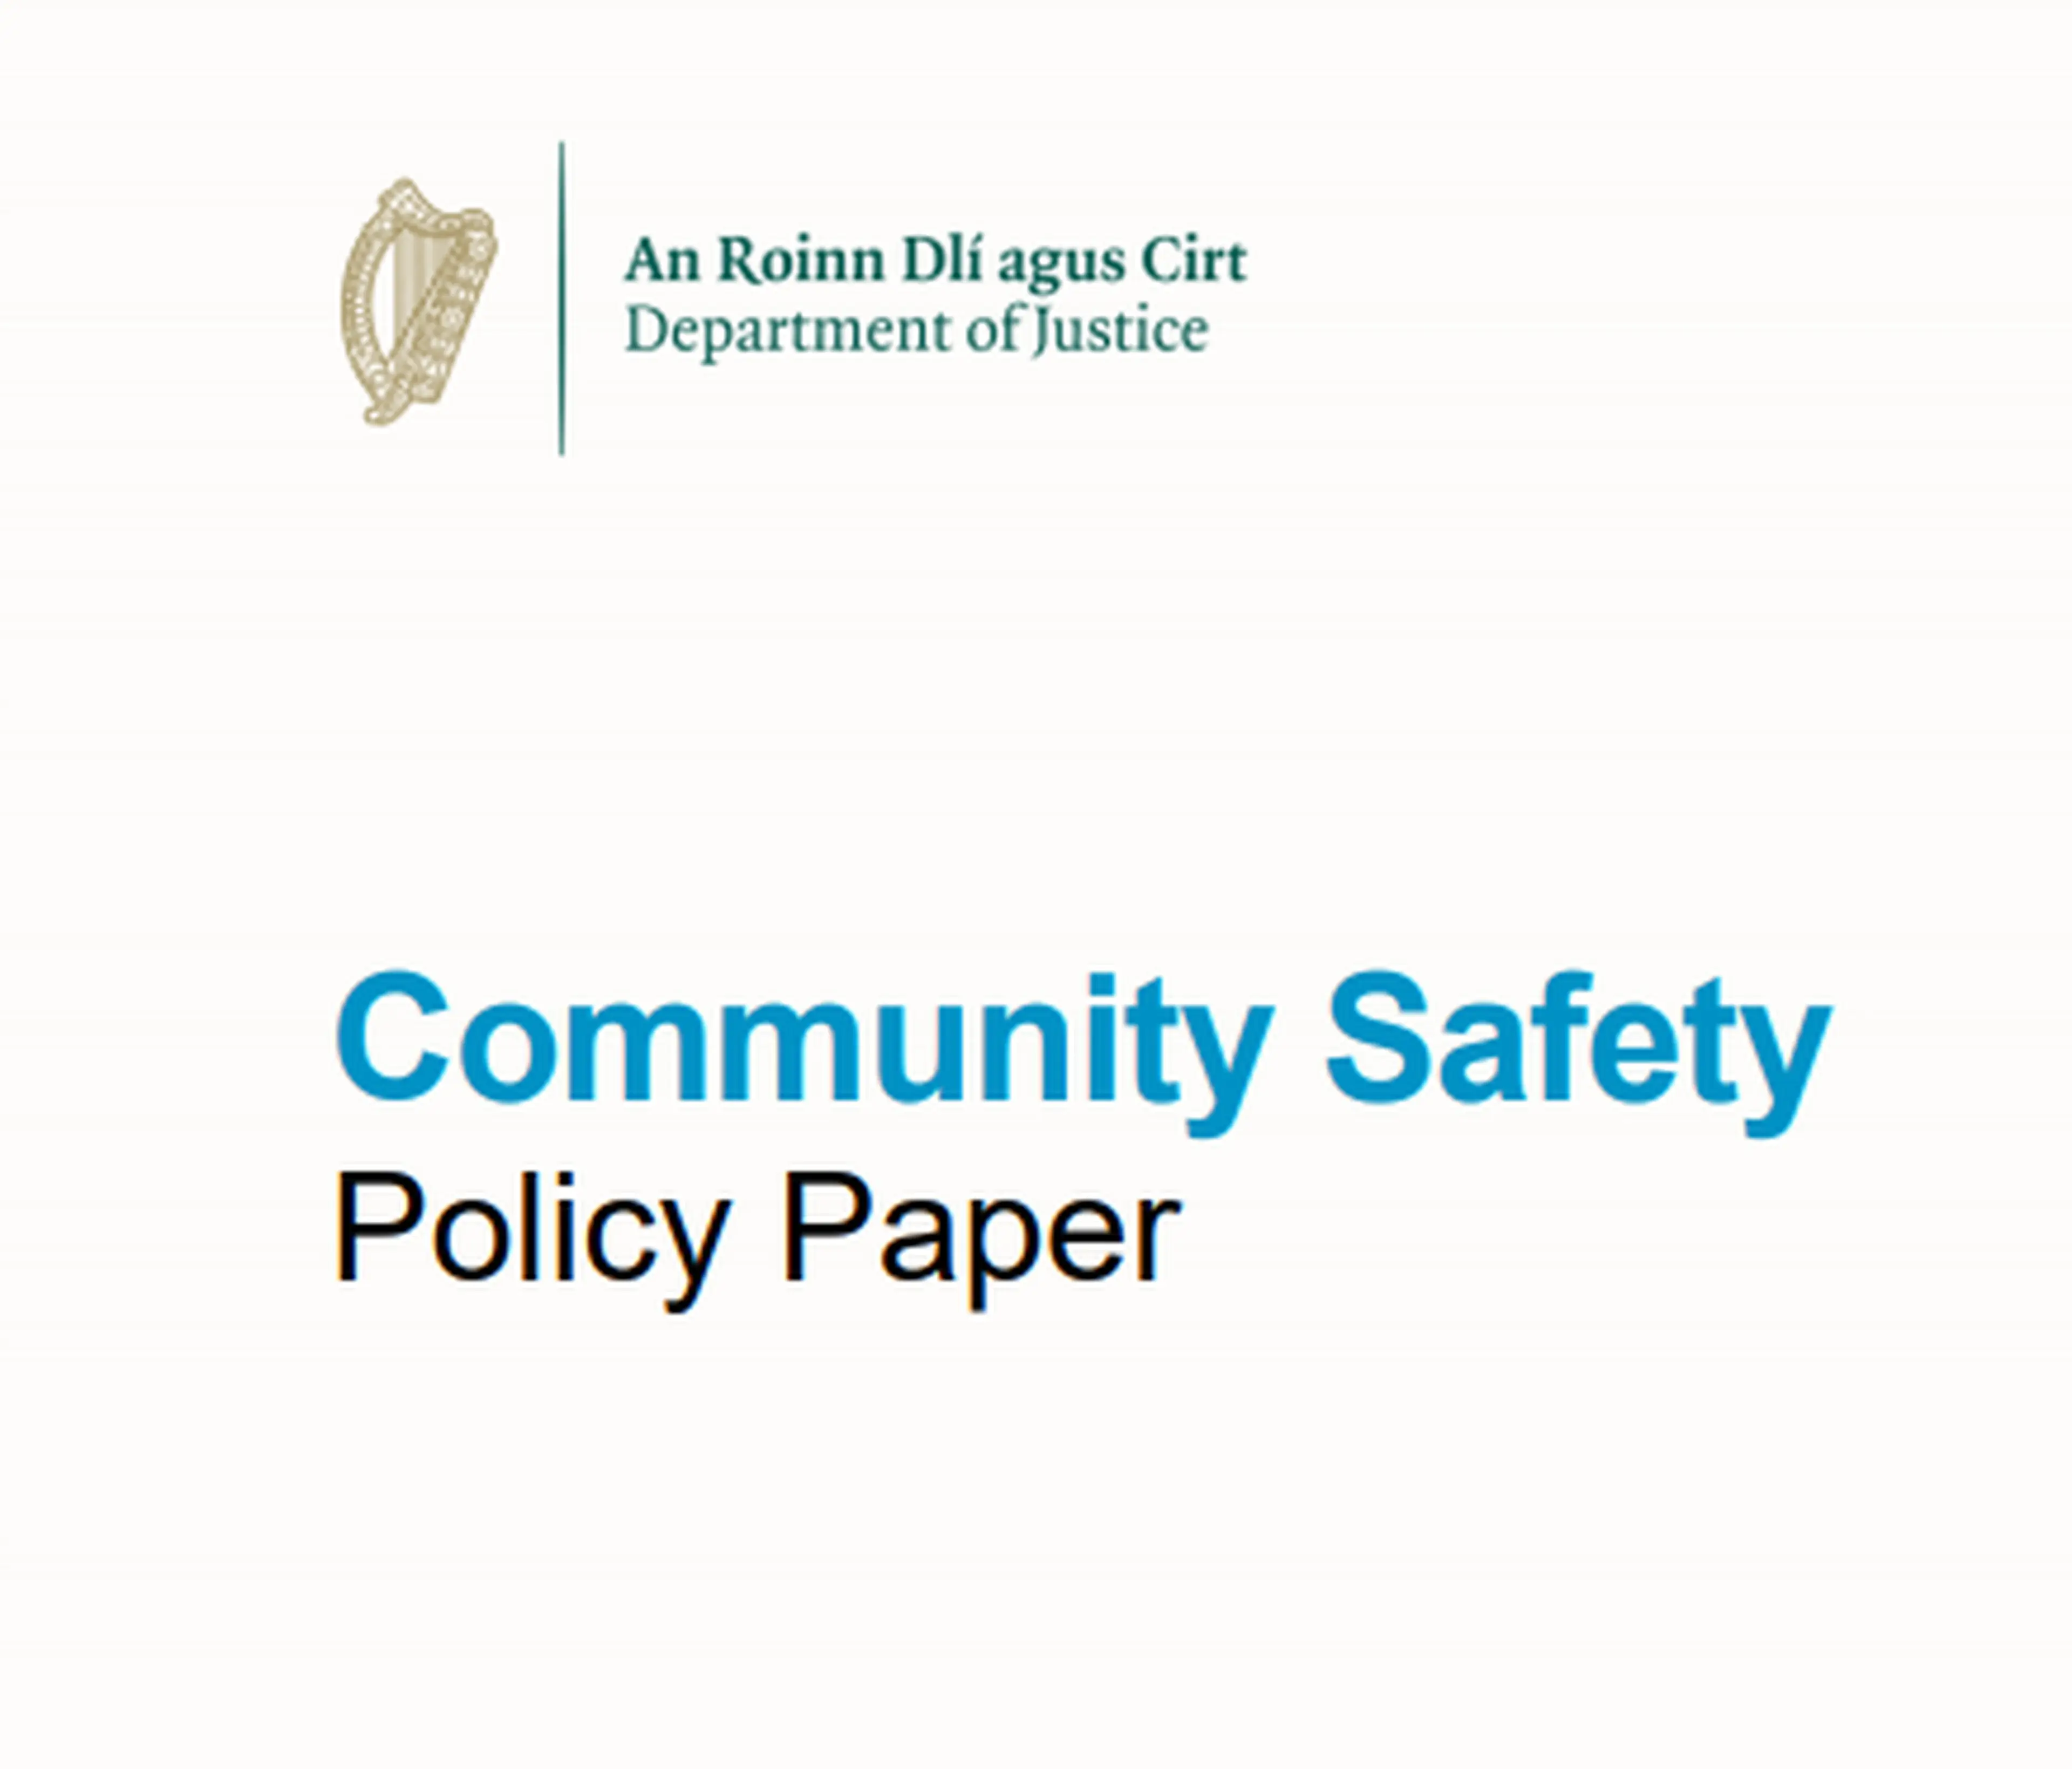 Community Safety Policy Paper Image